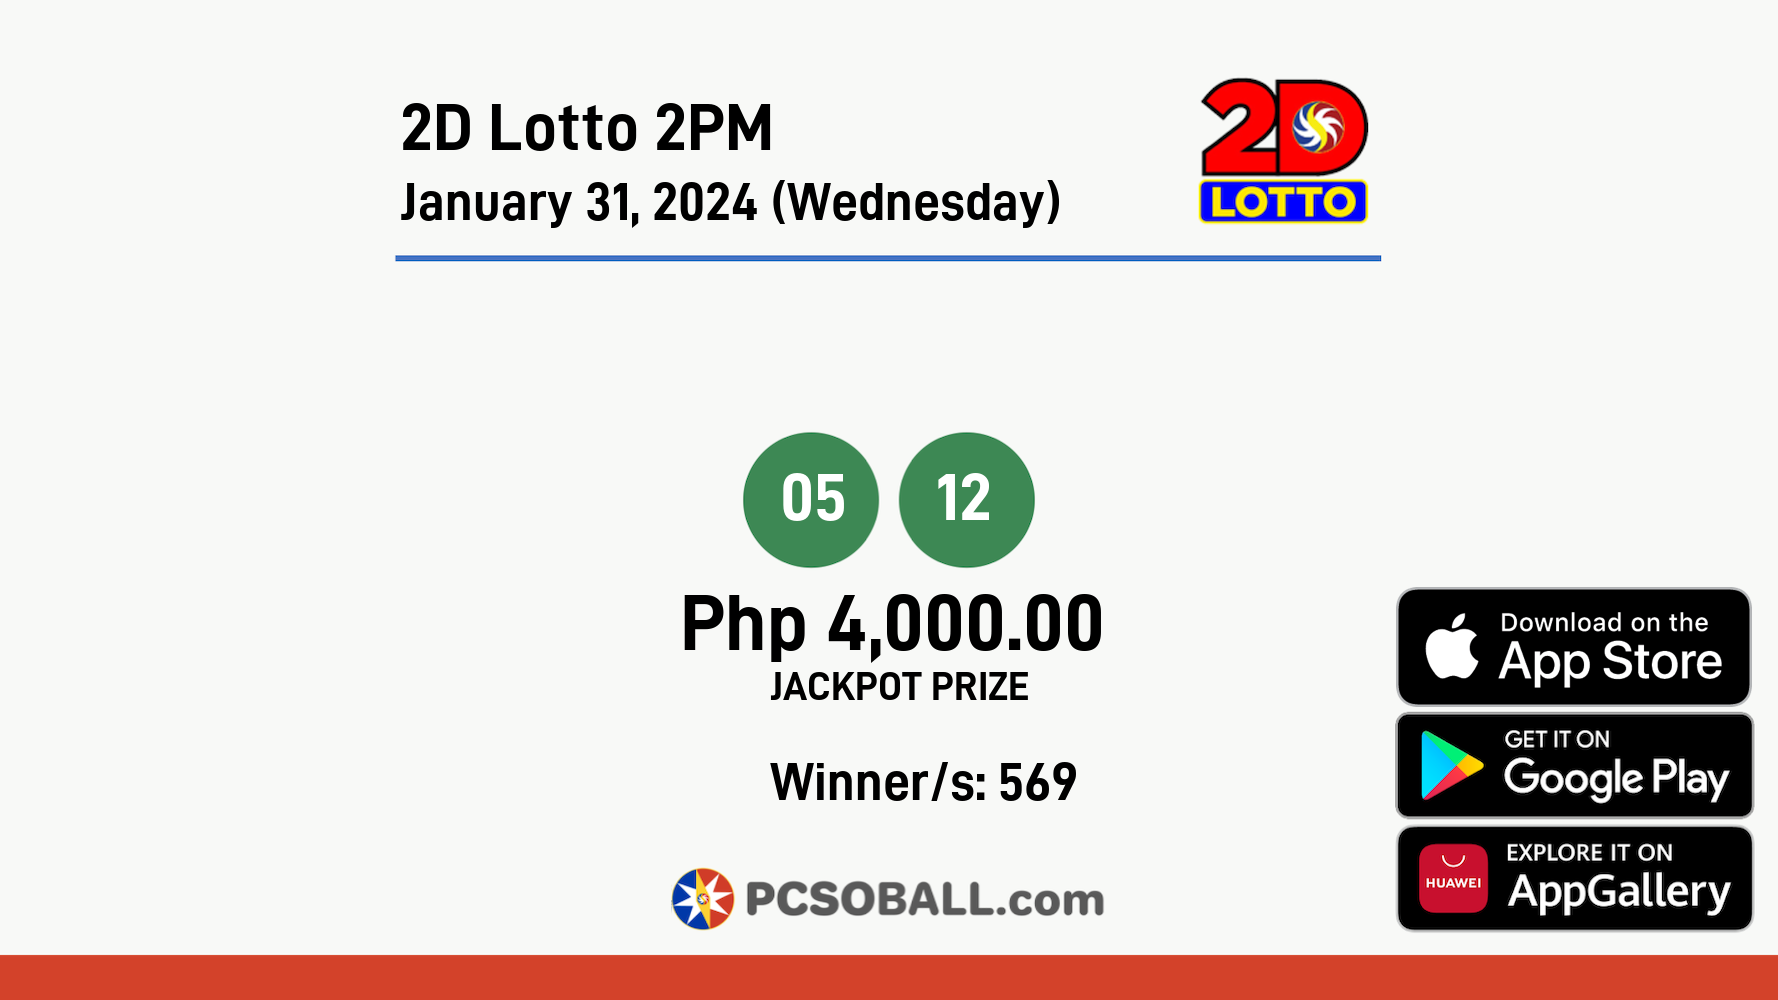 2D Lotto 2PM January 31, 2024 (Wednesday) Result